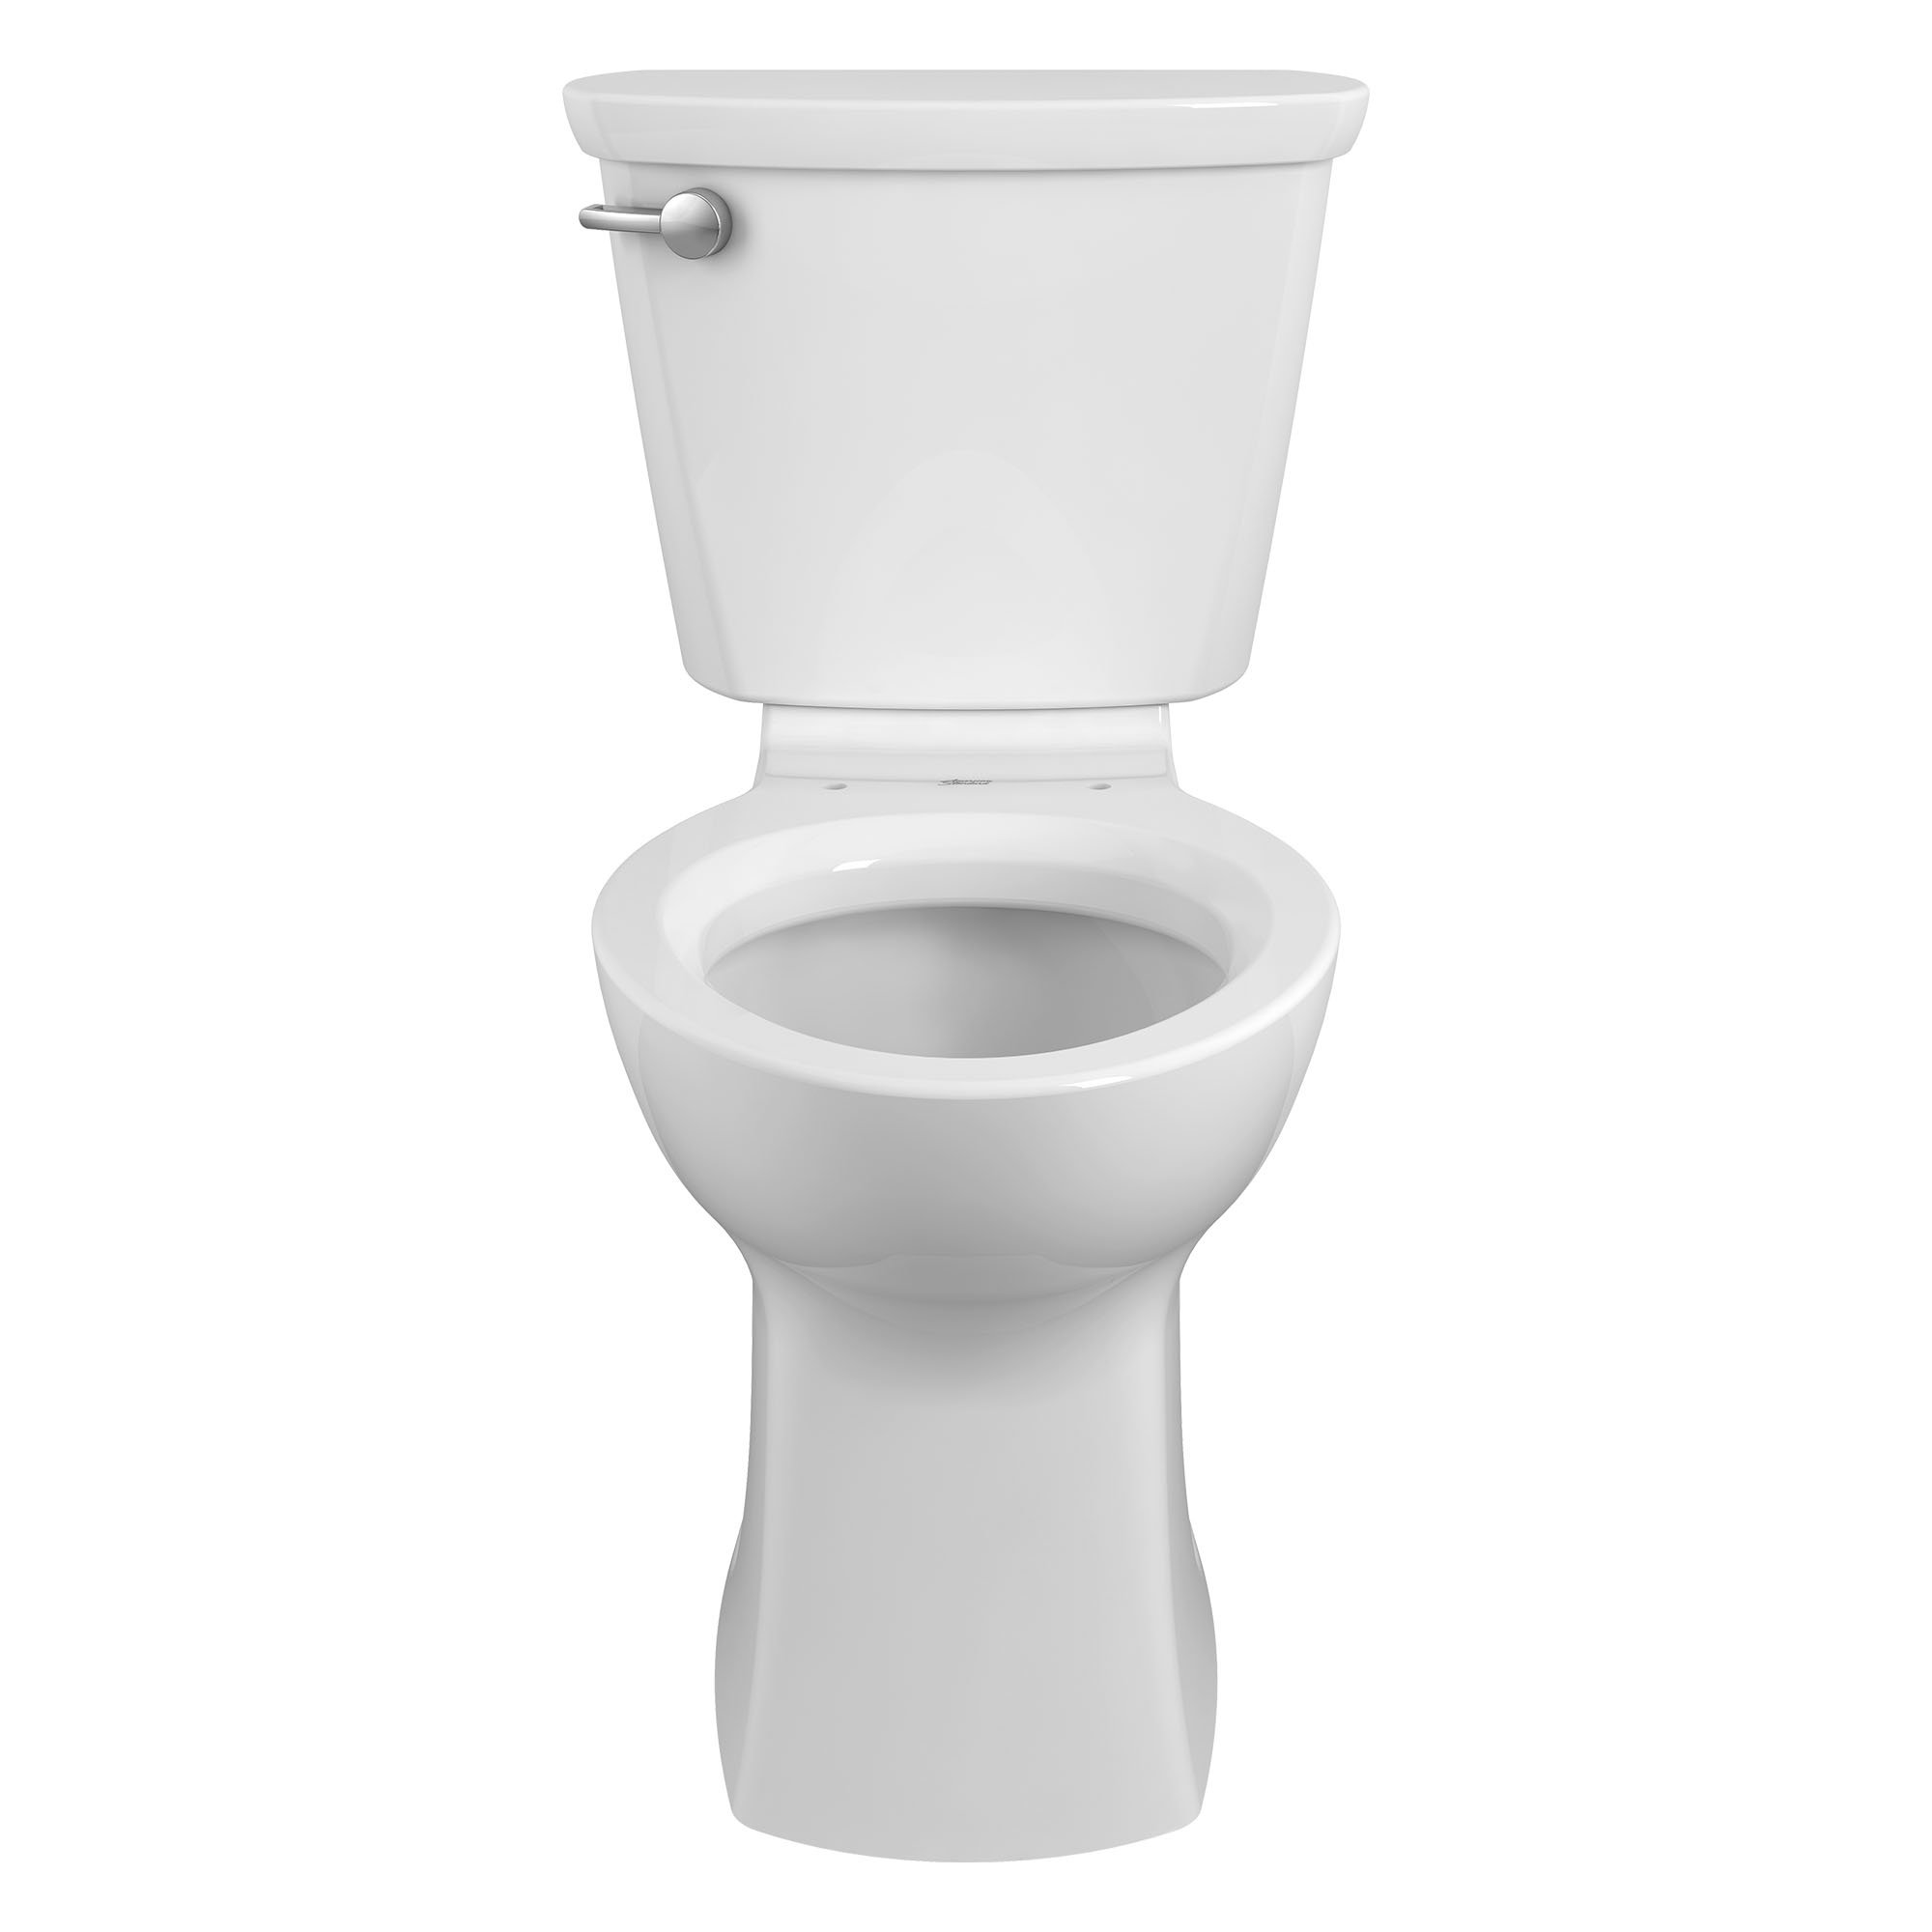 Cadet® PRO Two-Piece 1.28 gpf/4.8 Lpf Standard Height Elongated 10-Inch Rough Toilet Less Seat